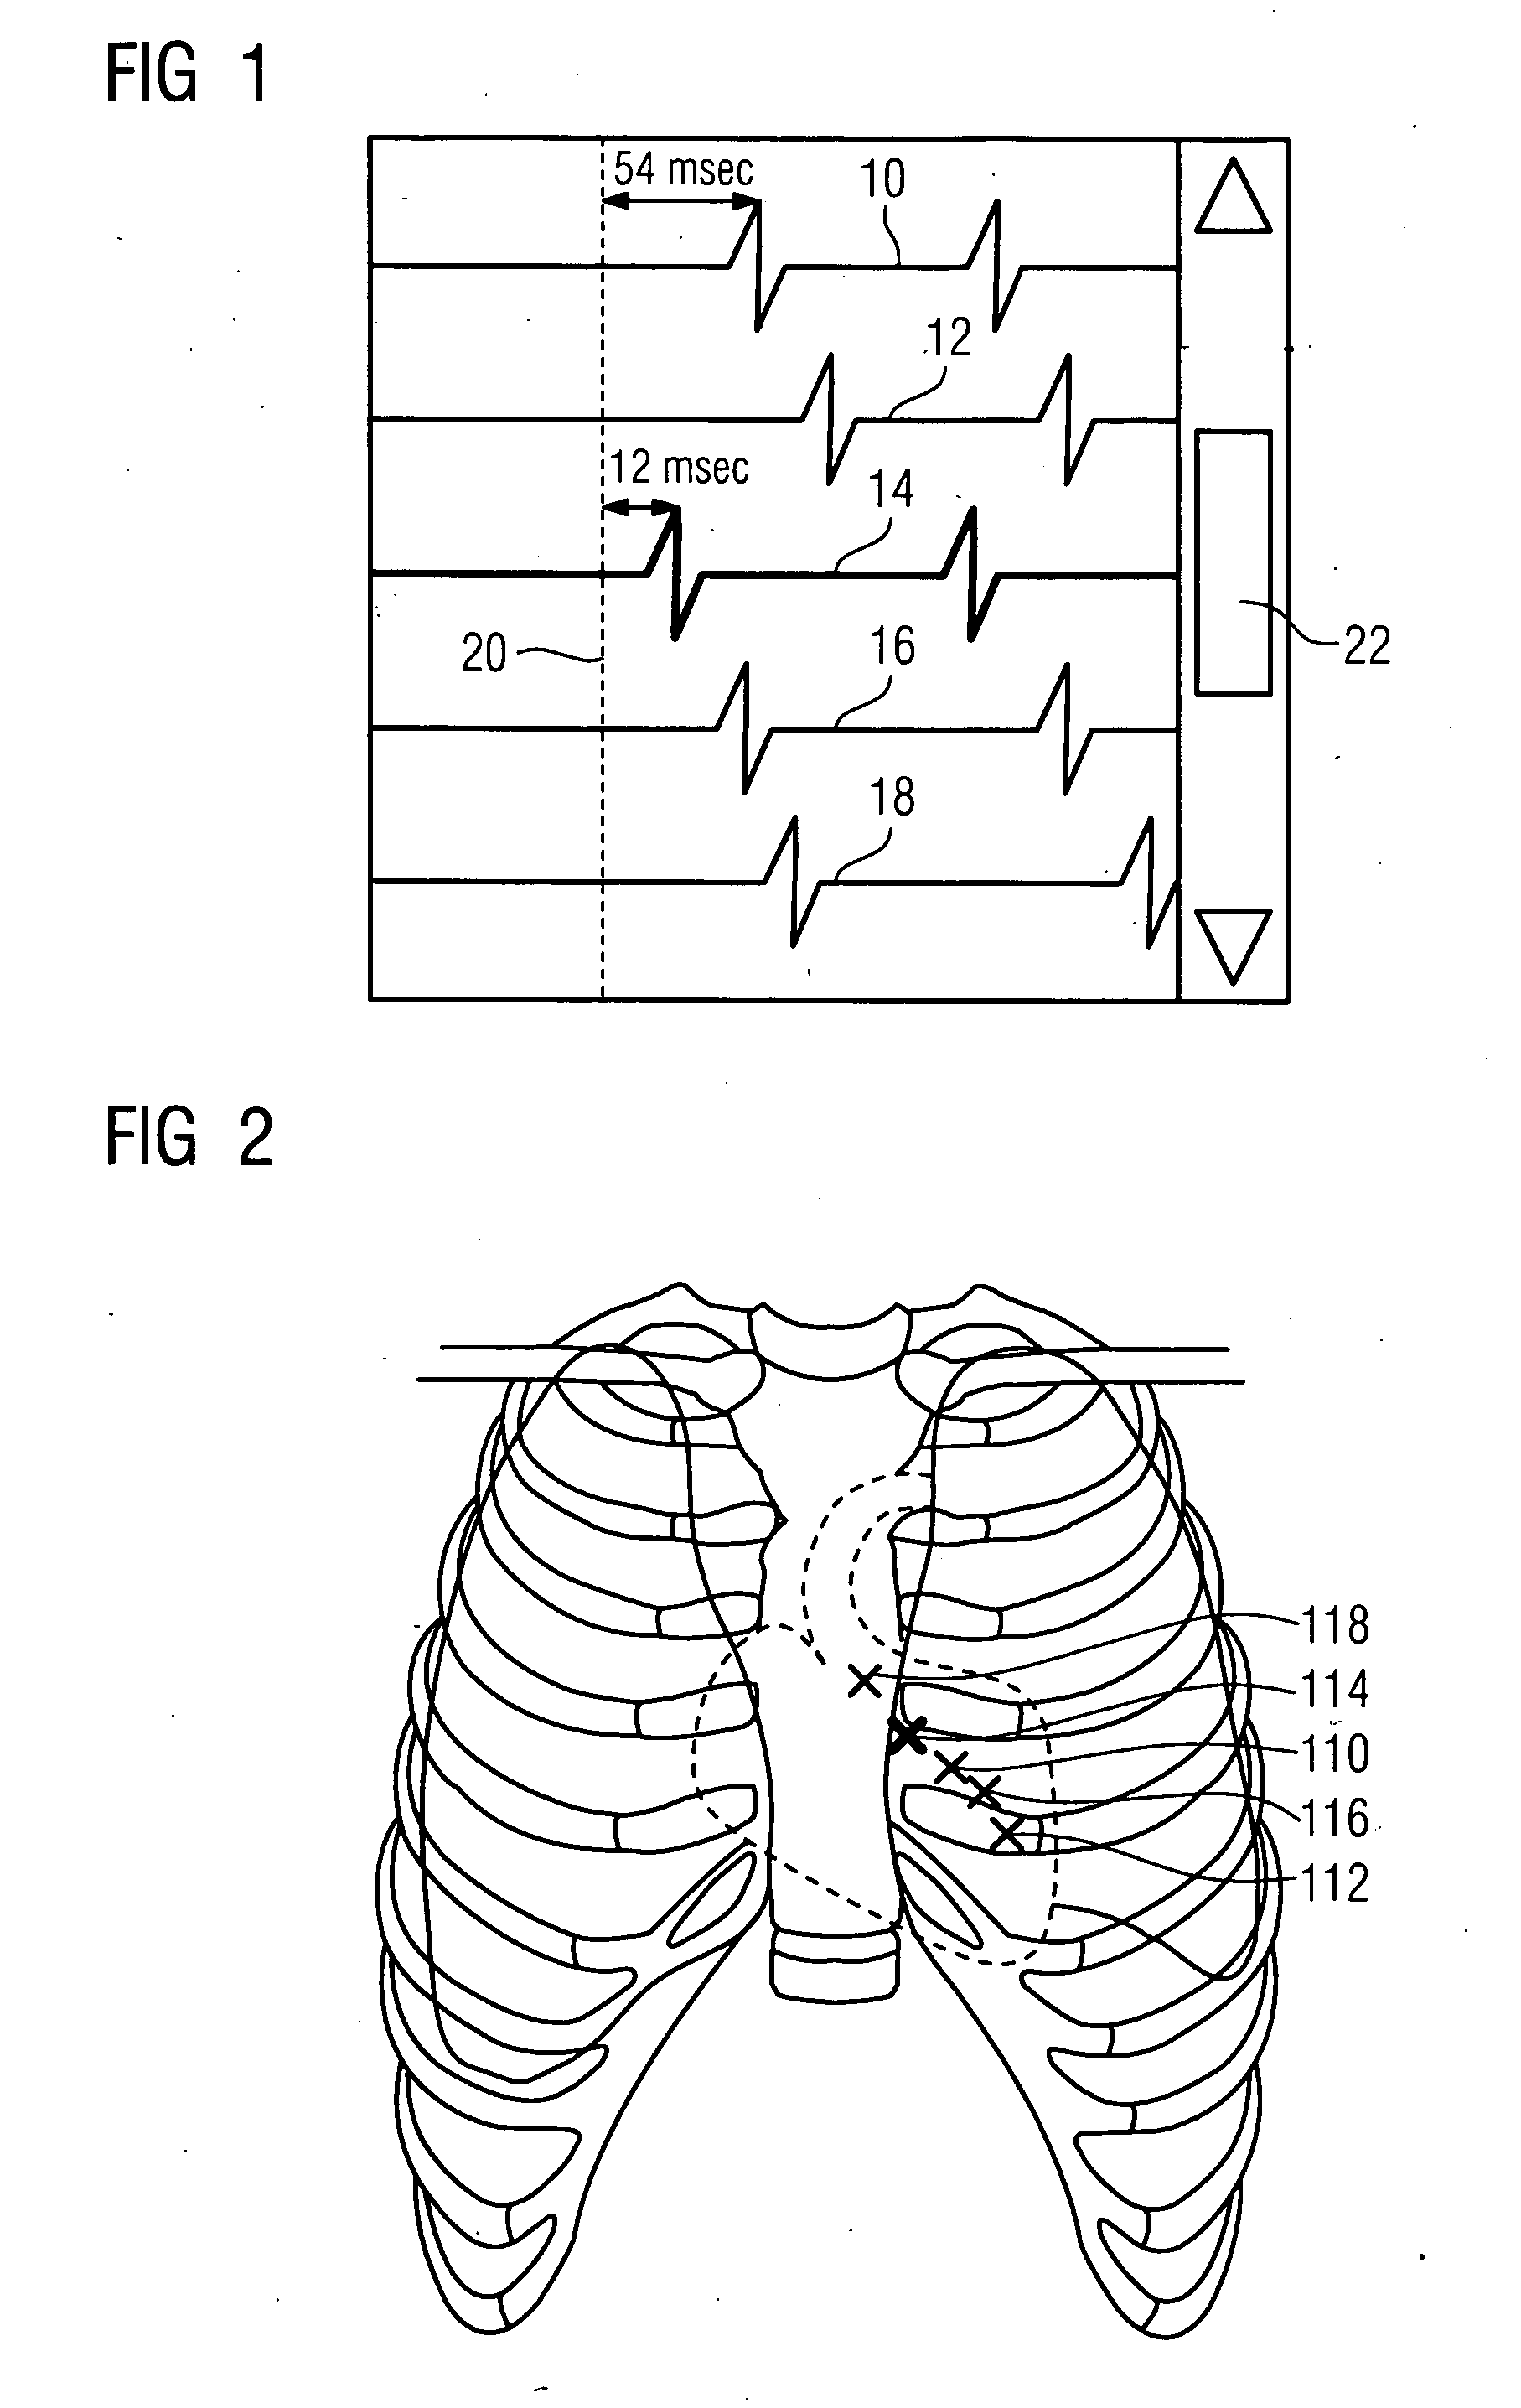 Method for providing measuring data for the precise local positioning of a catheter